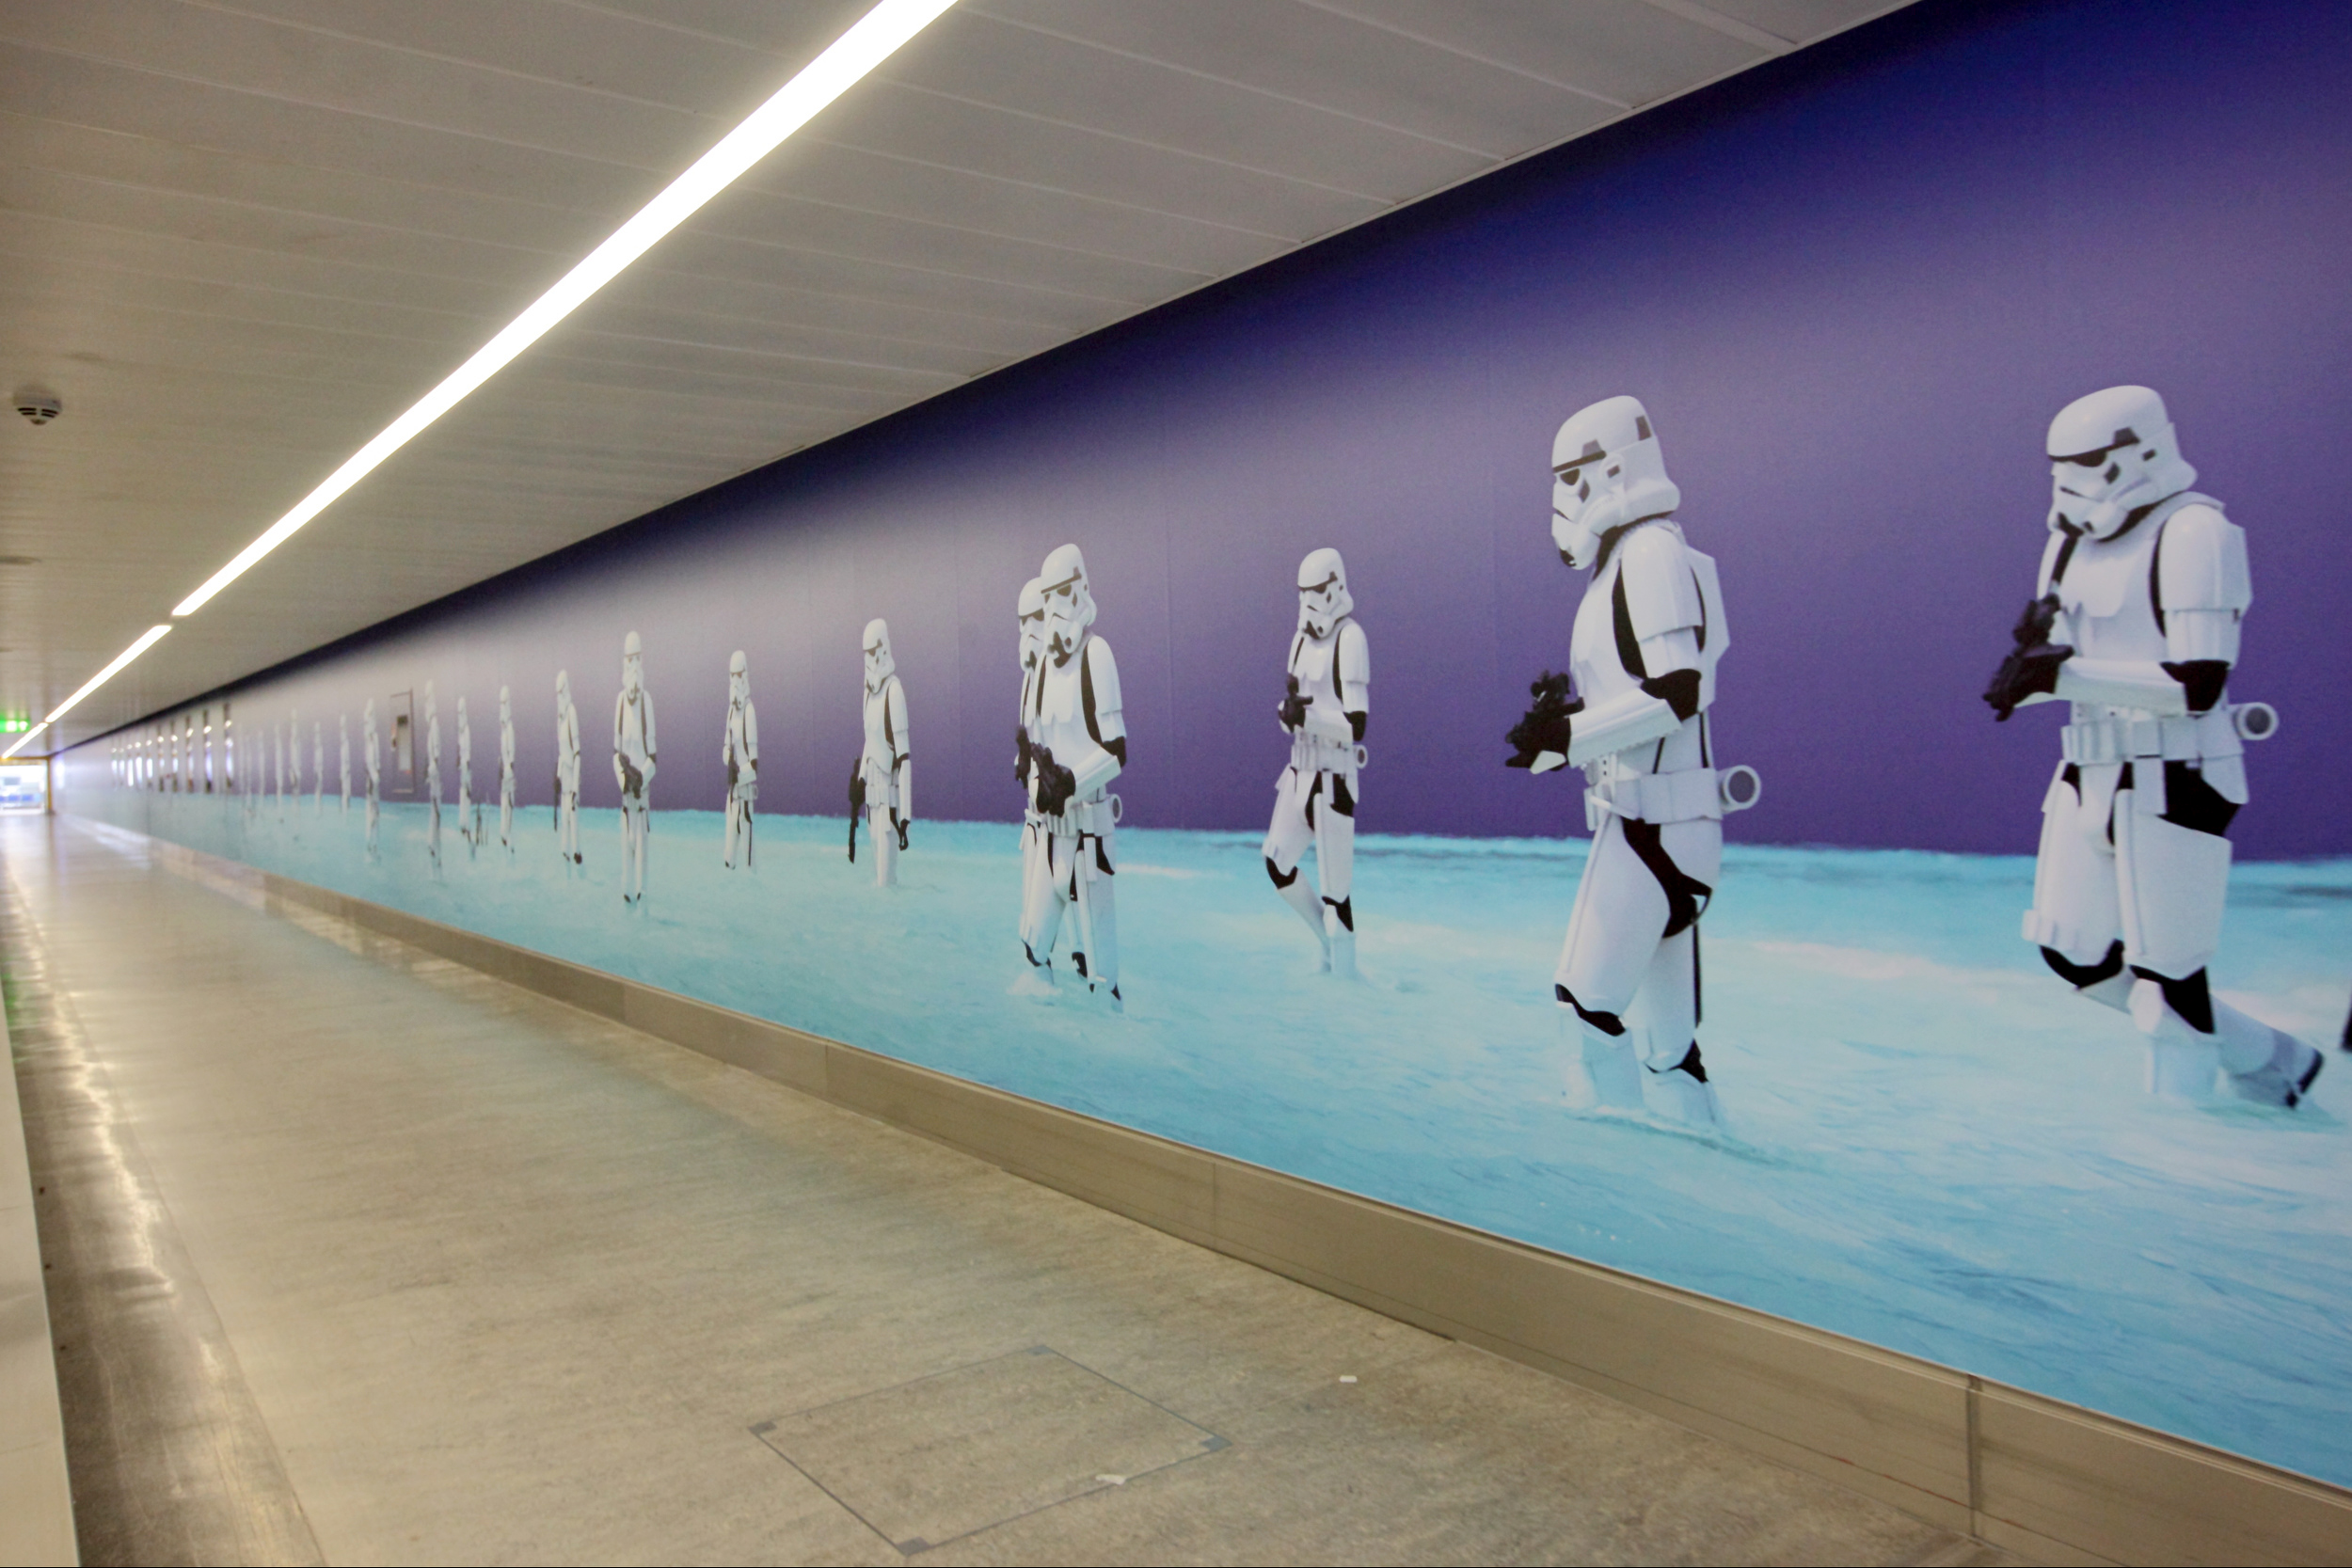 Stormtroopers land at Gatwick South.